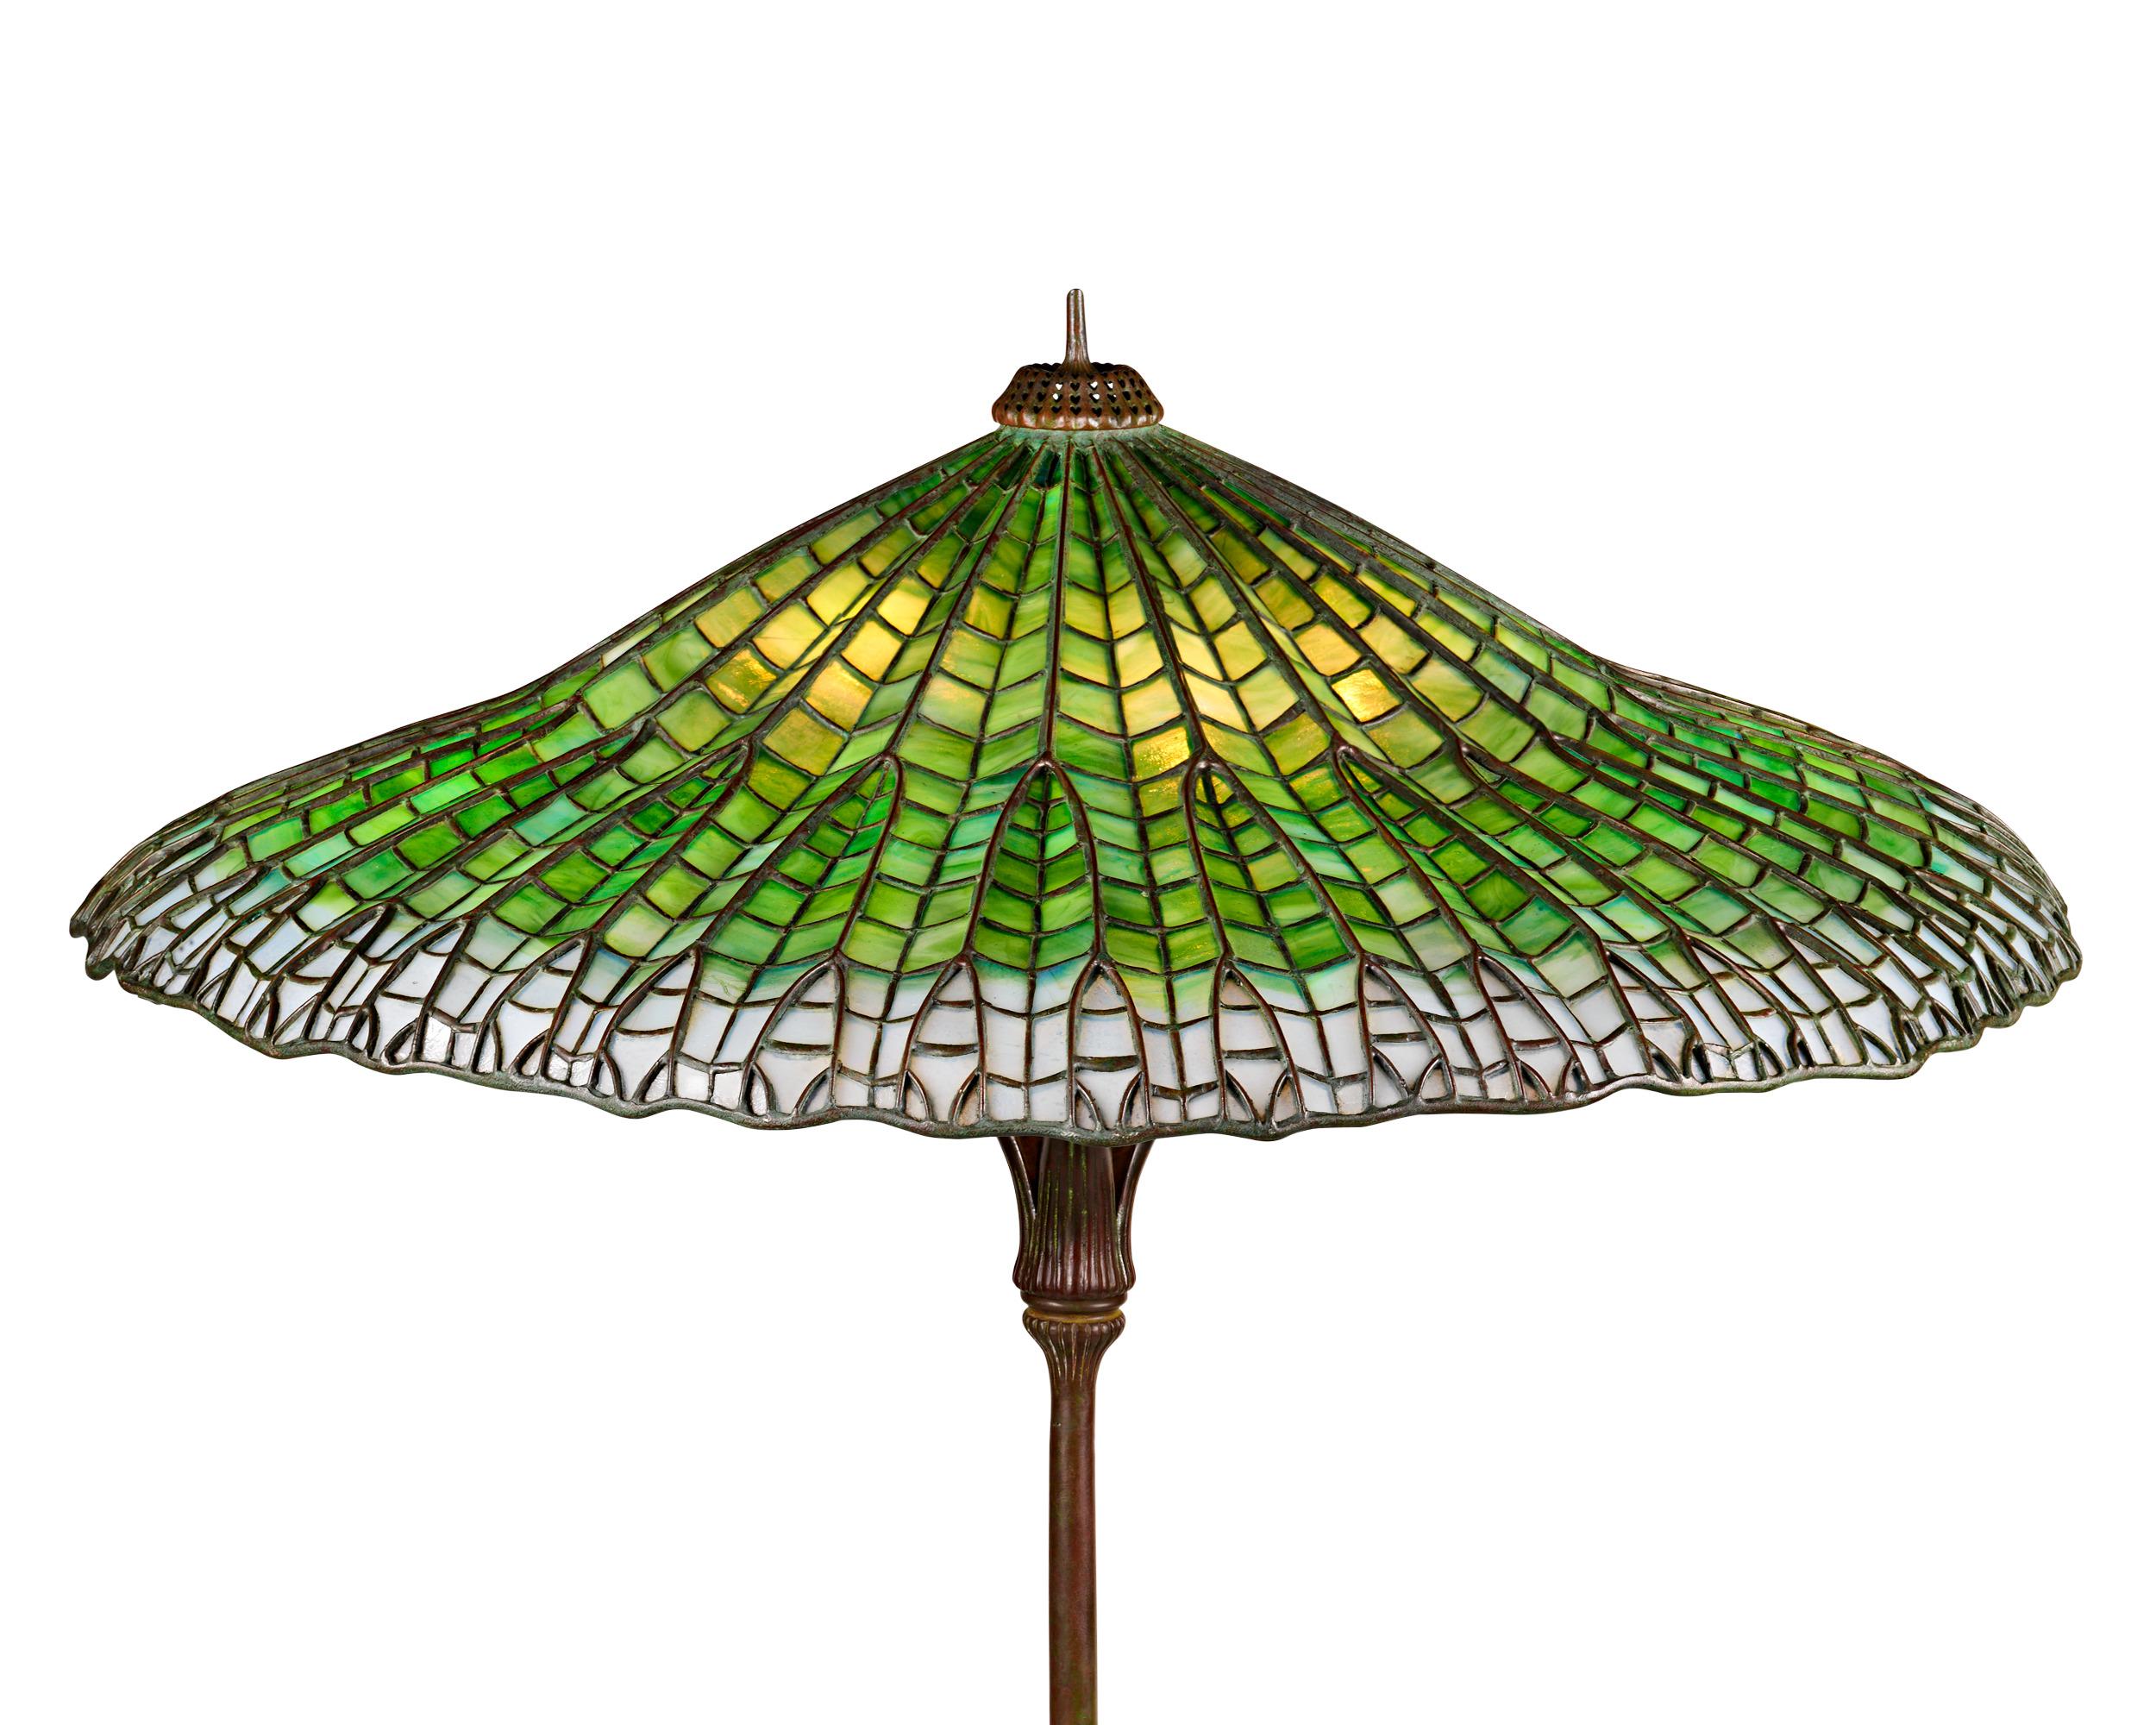 This Tiffany Studios geometric leaded glass and bronze table lamp features the iconic Lotus Pagoda shade and its complementary original bronze base. The elegant form of the lotus-inspired shade combines with the beautiful green gradient of the glass